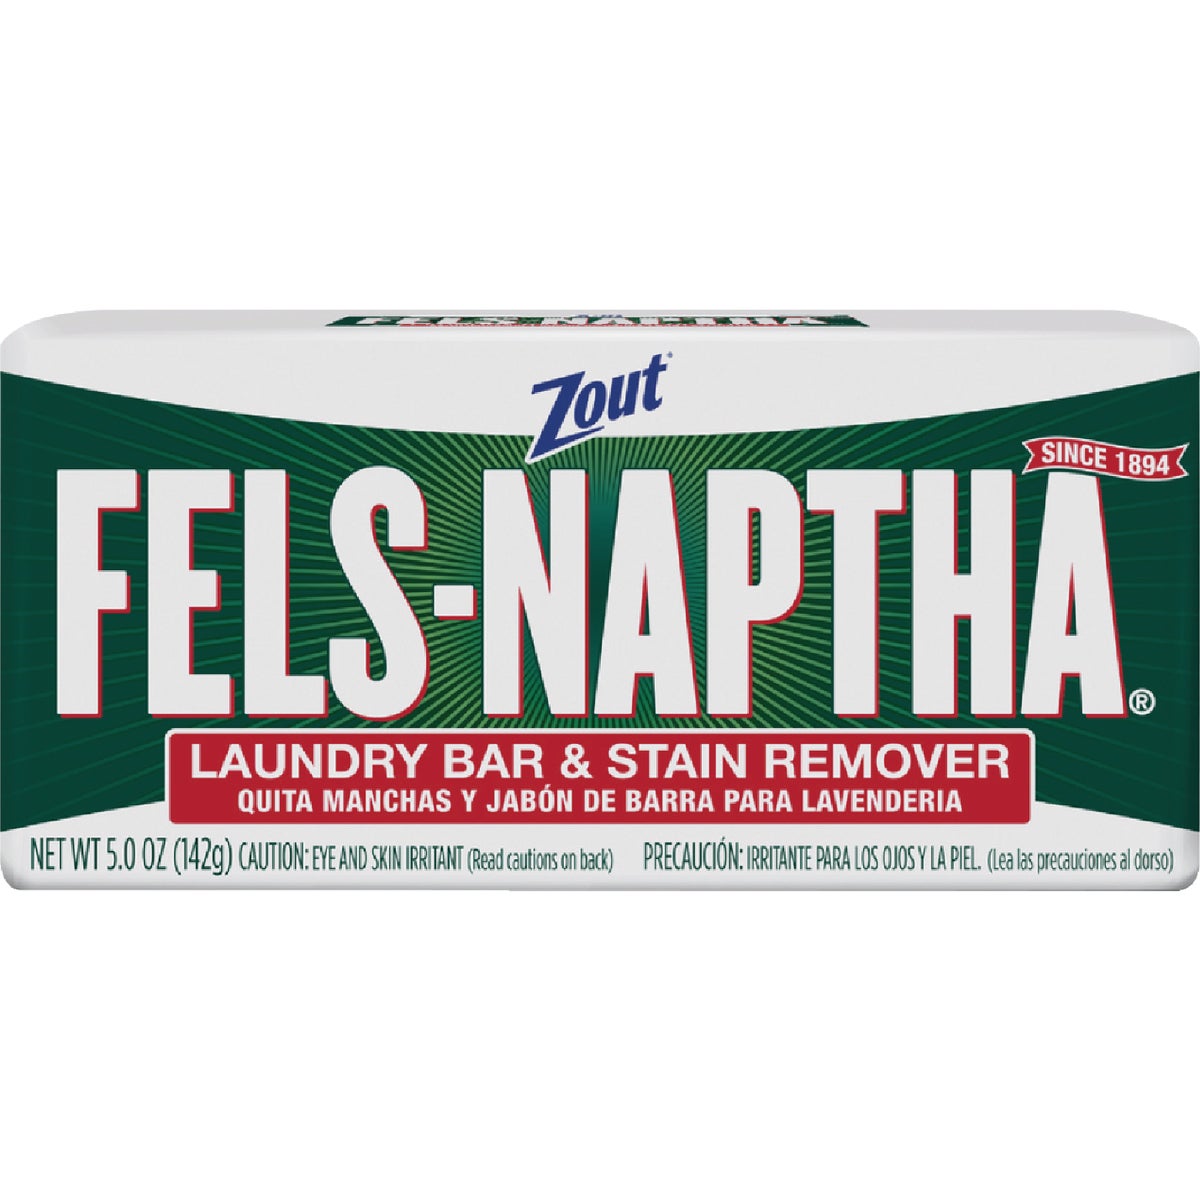 Item 632902, Fels-Naptha has been removing the toughest stains since 1894.